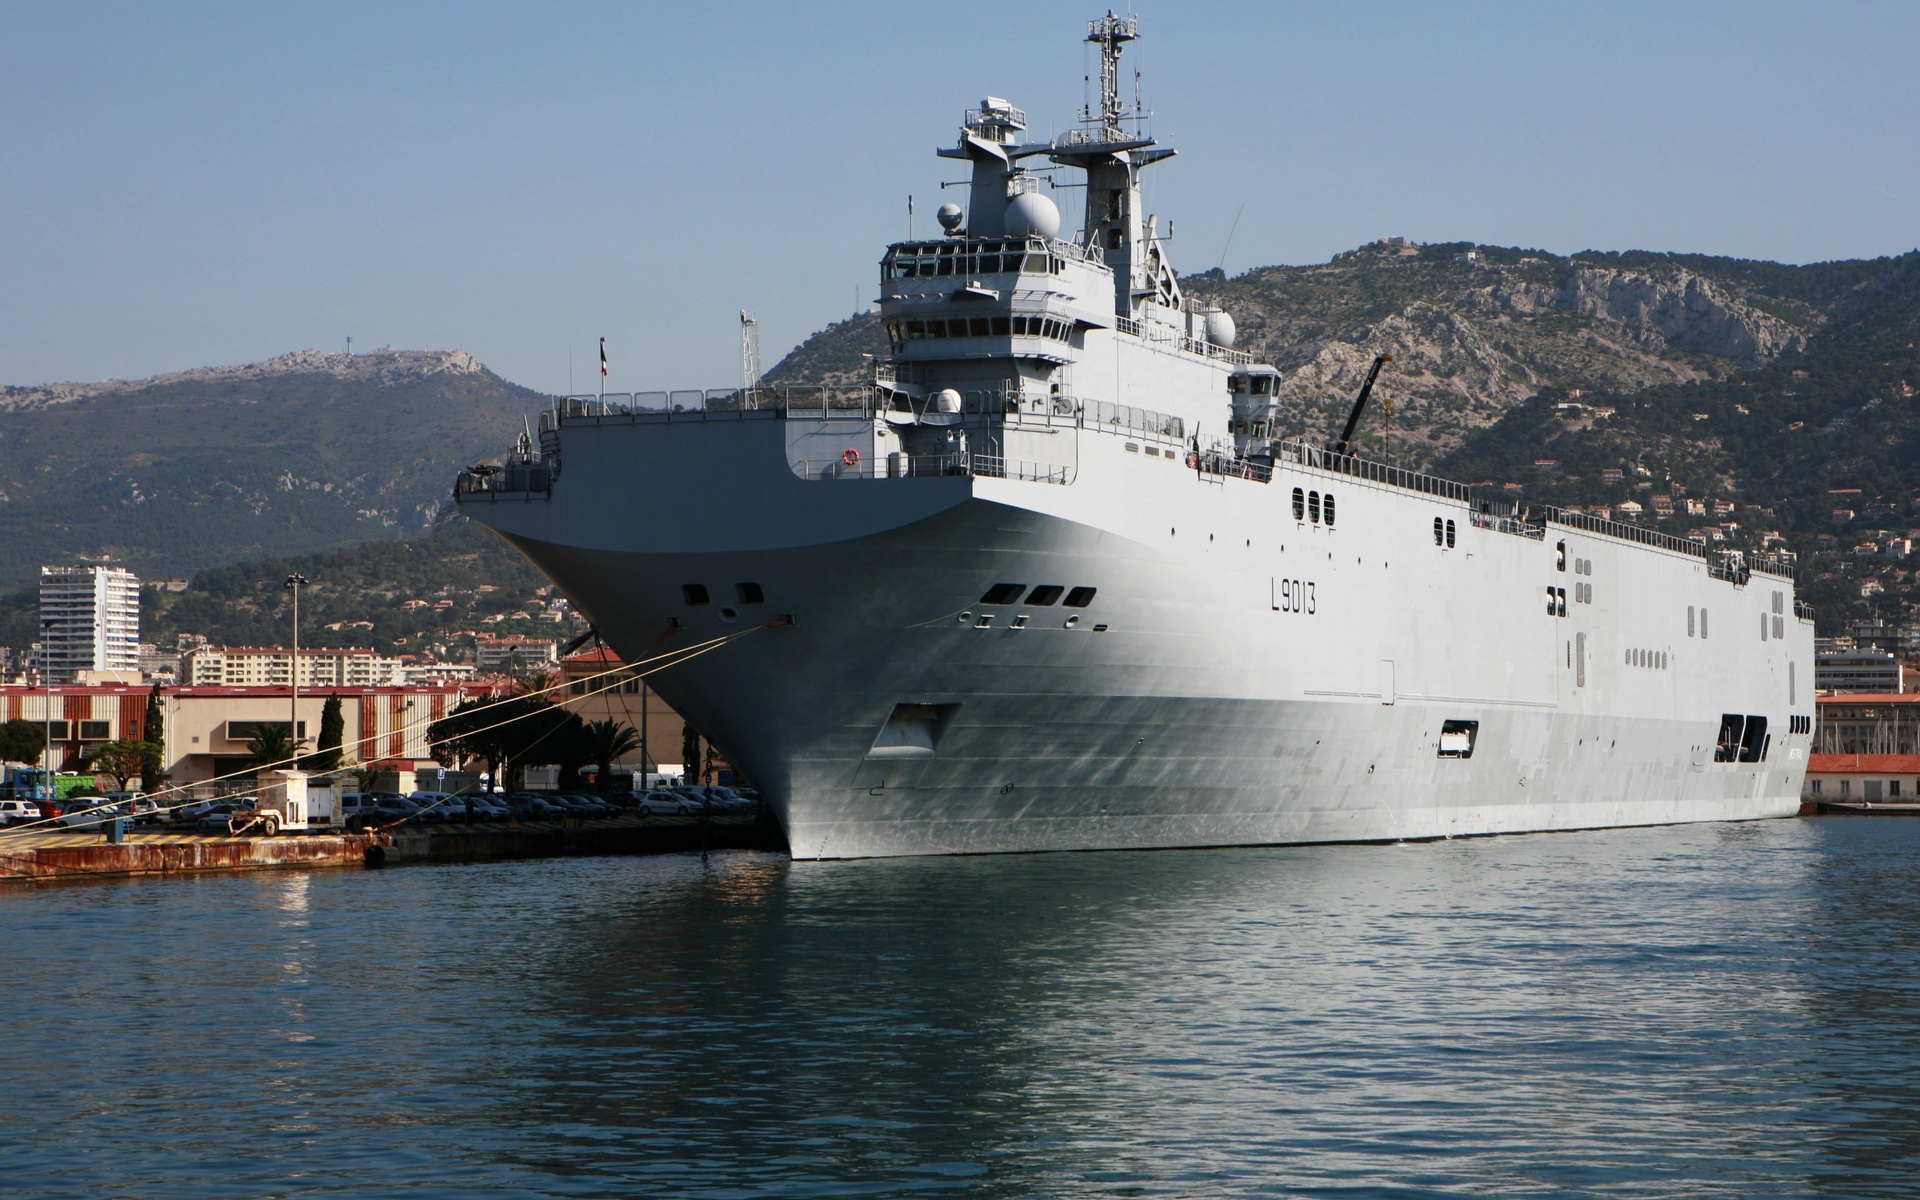 Helicopter Carrier Warship Amphibious Assault Ship French Ship Mistral L9013 1920x1200